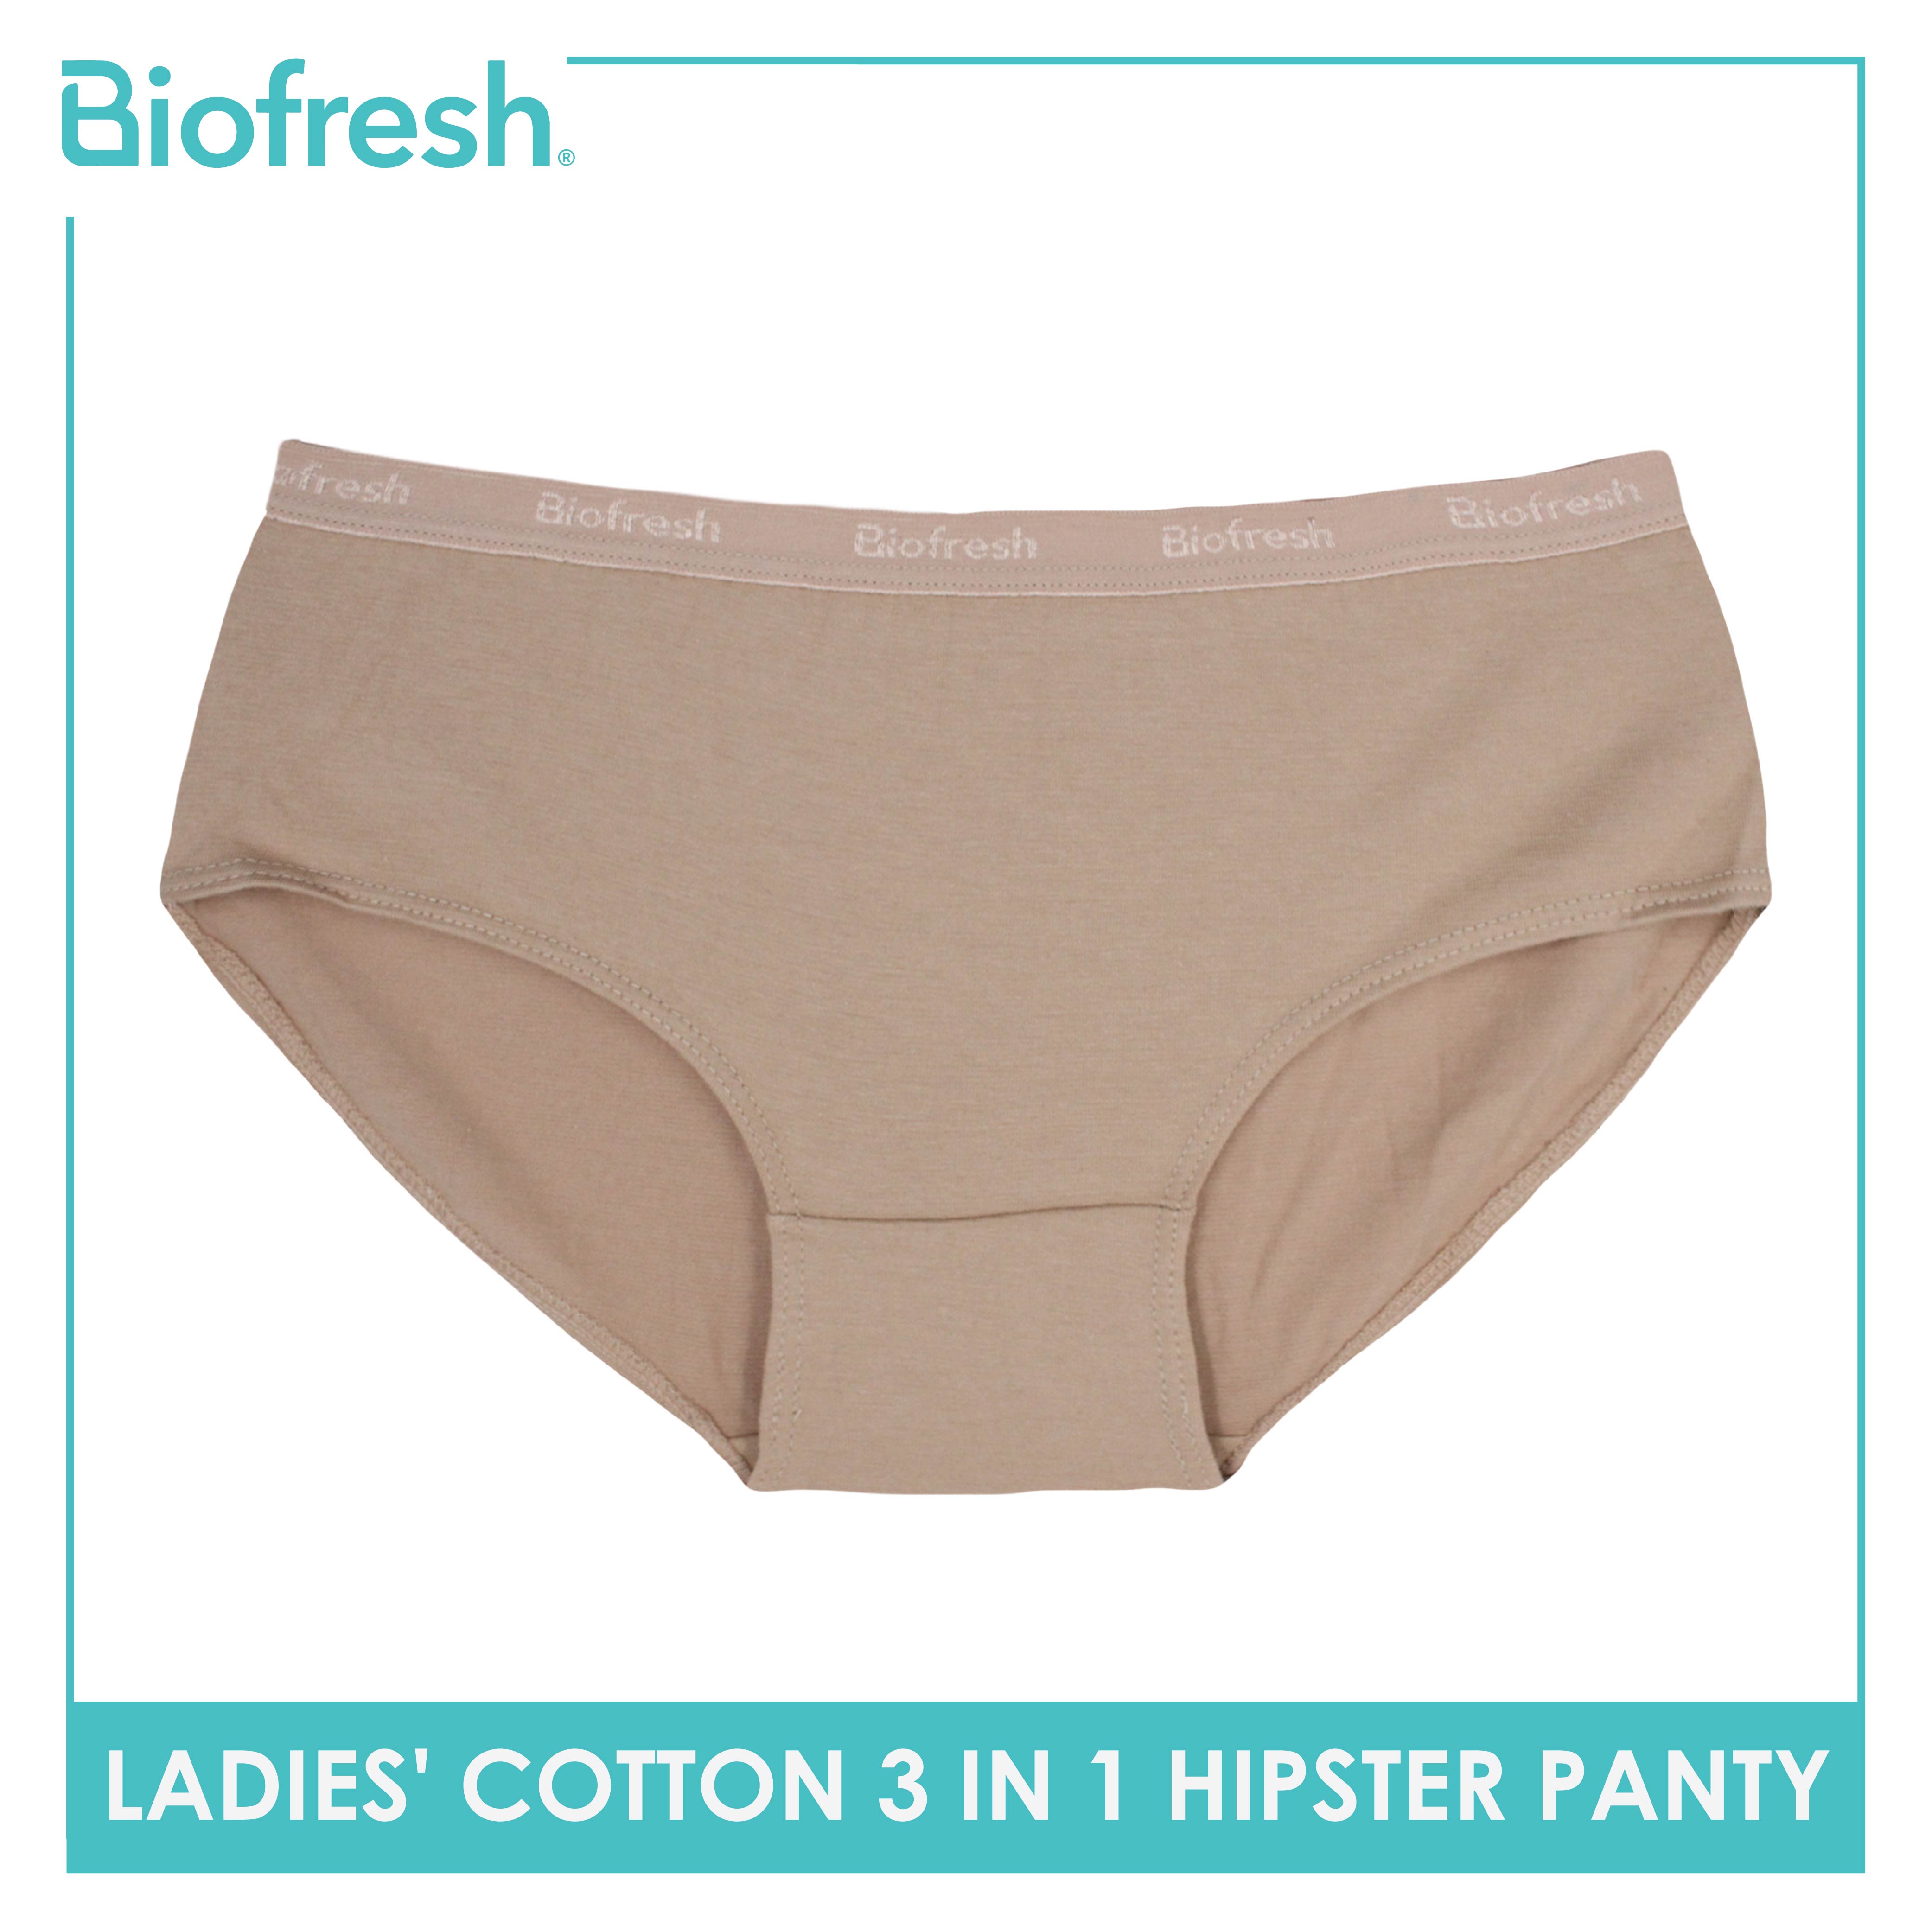 Buy Women's Antibacterial Hipster Panty - 80% Nylon, 20% Elastane, Hipster  Panty For Women In Solid Nude (Beige) Colour